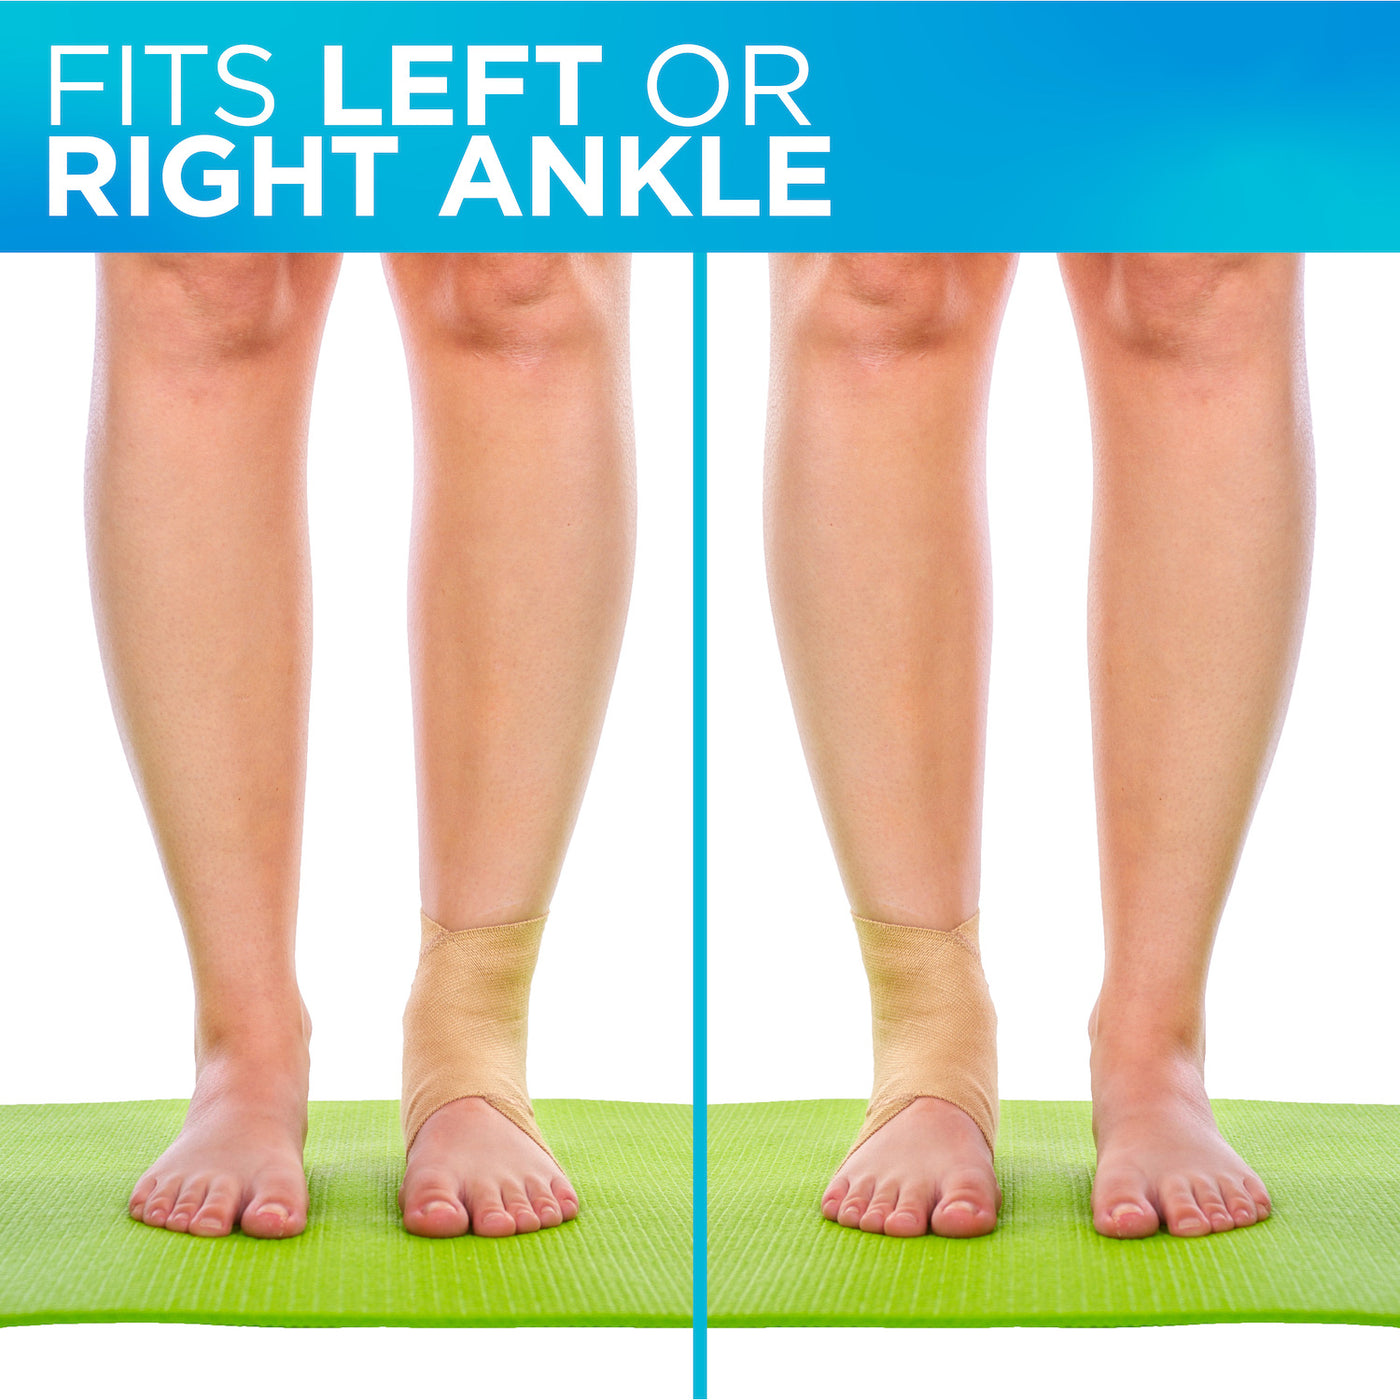 The soft ankle ace wrap comes fits left or right foot in a tan ankle brace color